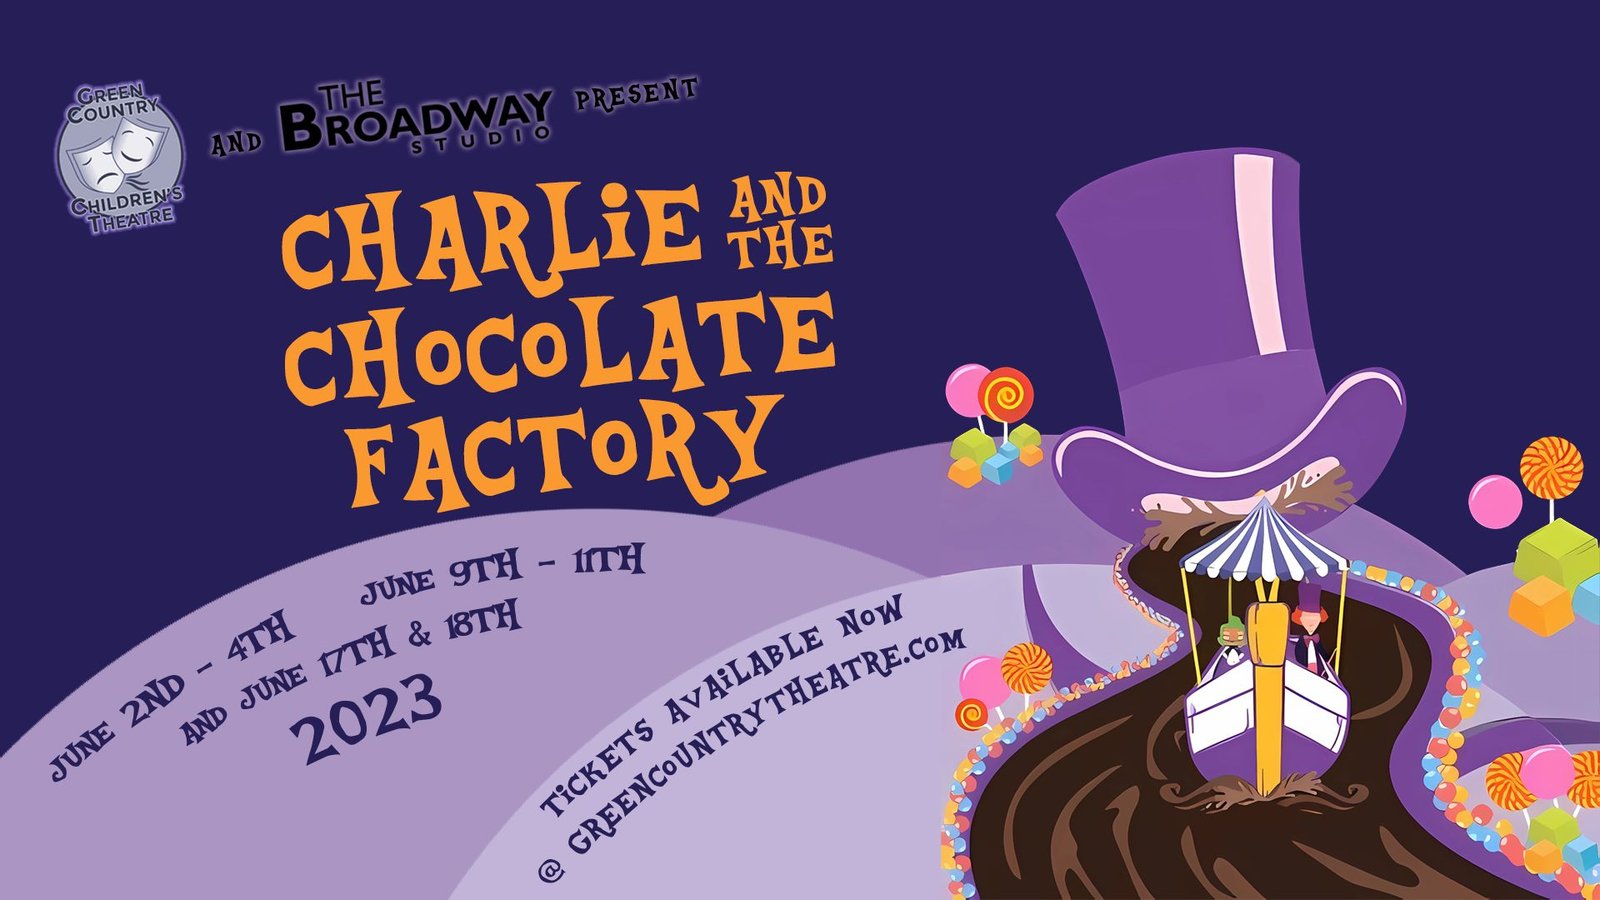 Green Country Children’s Theatre: “Charlie and the Chocolate Factory”